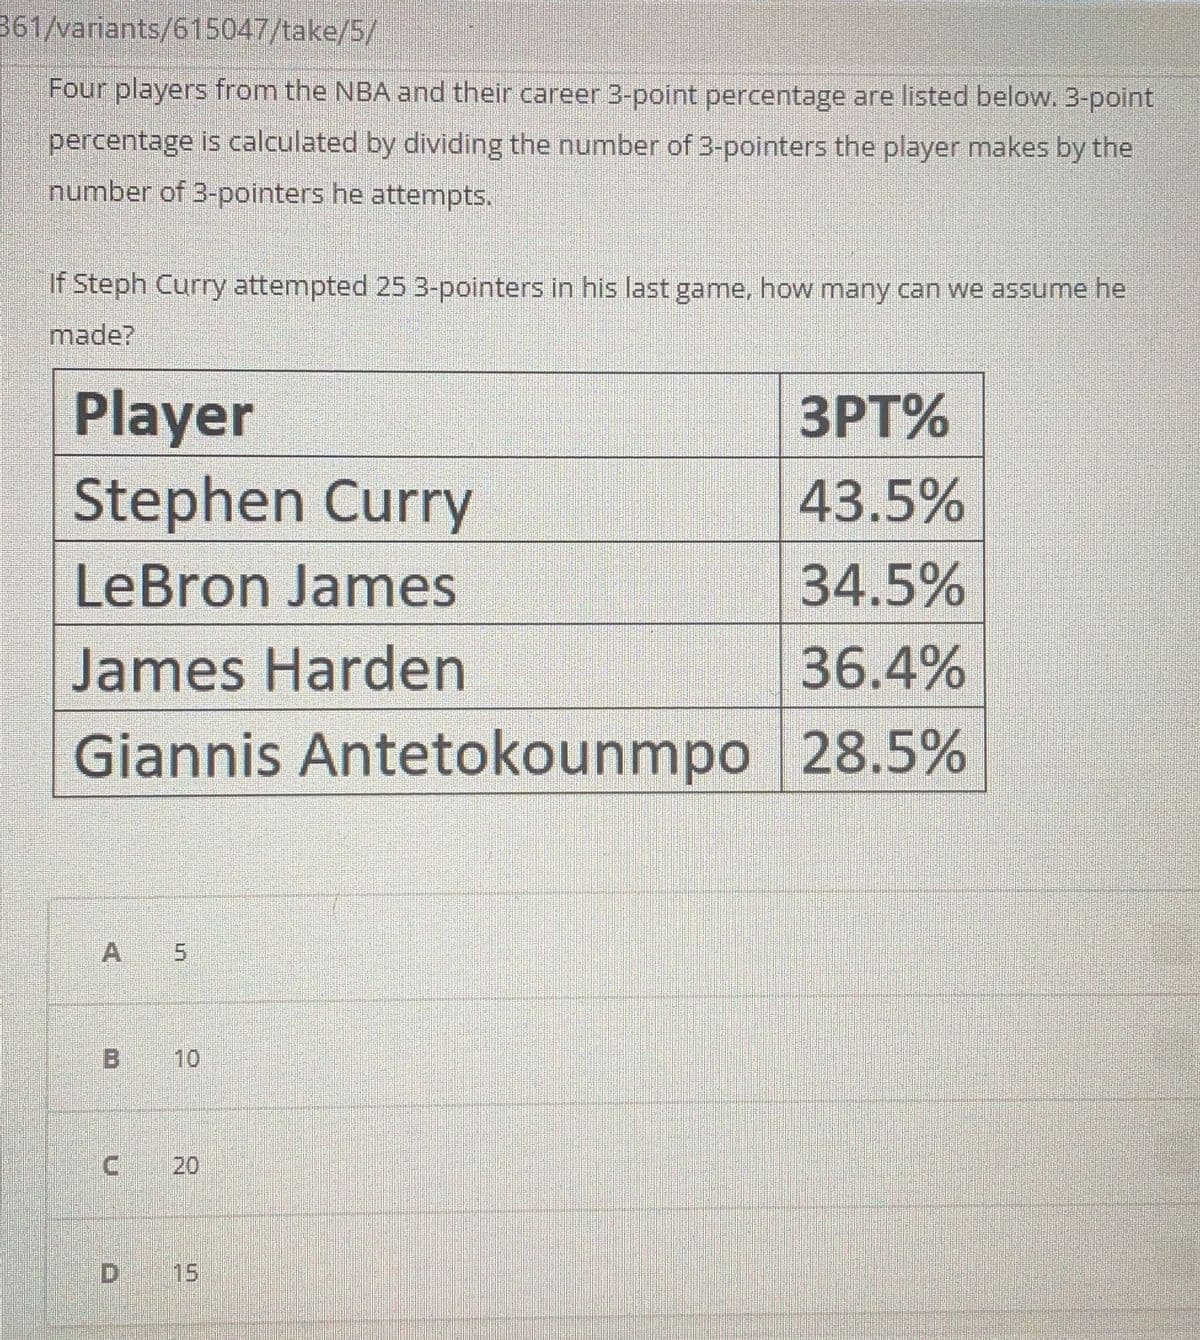 361/variants/615047/take/5/
Four players from the NBA and their career 3-point percentage are listed below. 3-point
percentage is calculated by dividing the number of 3-pointers the player makes by the
number of 3-pointers he attempts.
If Steph Curry attempted 25 3-pointers in his last game, how many can we assume he
made?
Player
Stephen Curry
3PT%
43.5%
LeBron James
34.5%
James Harden
36.4%
Giannis Antetokounmpo 28.5%
A 5
B 10
20
D 15
